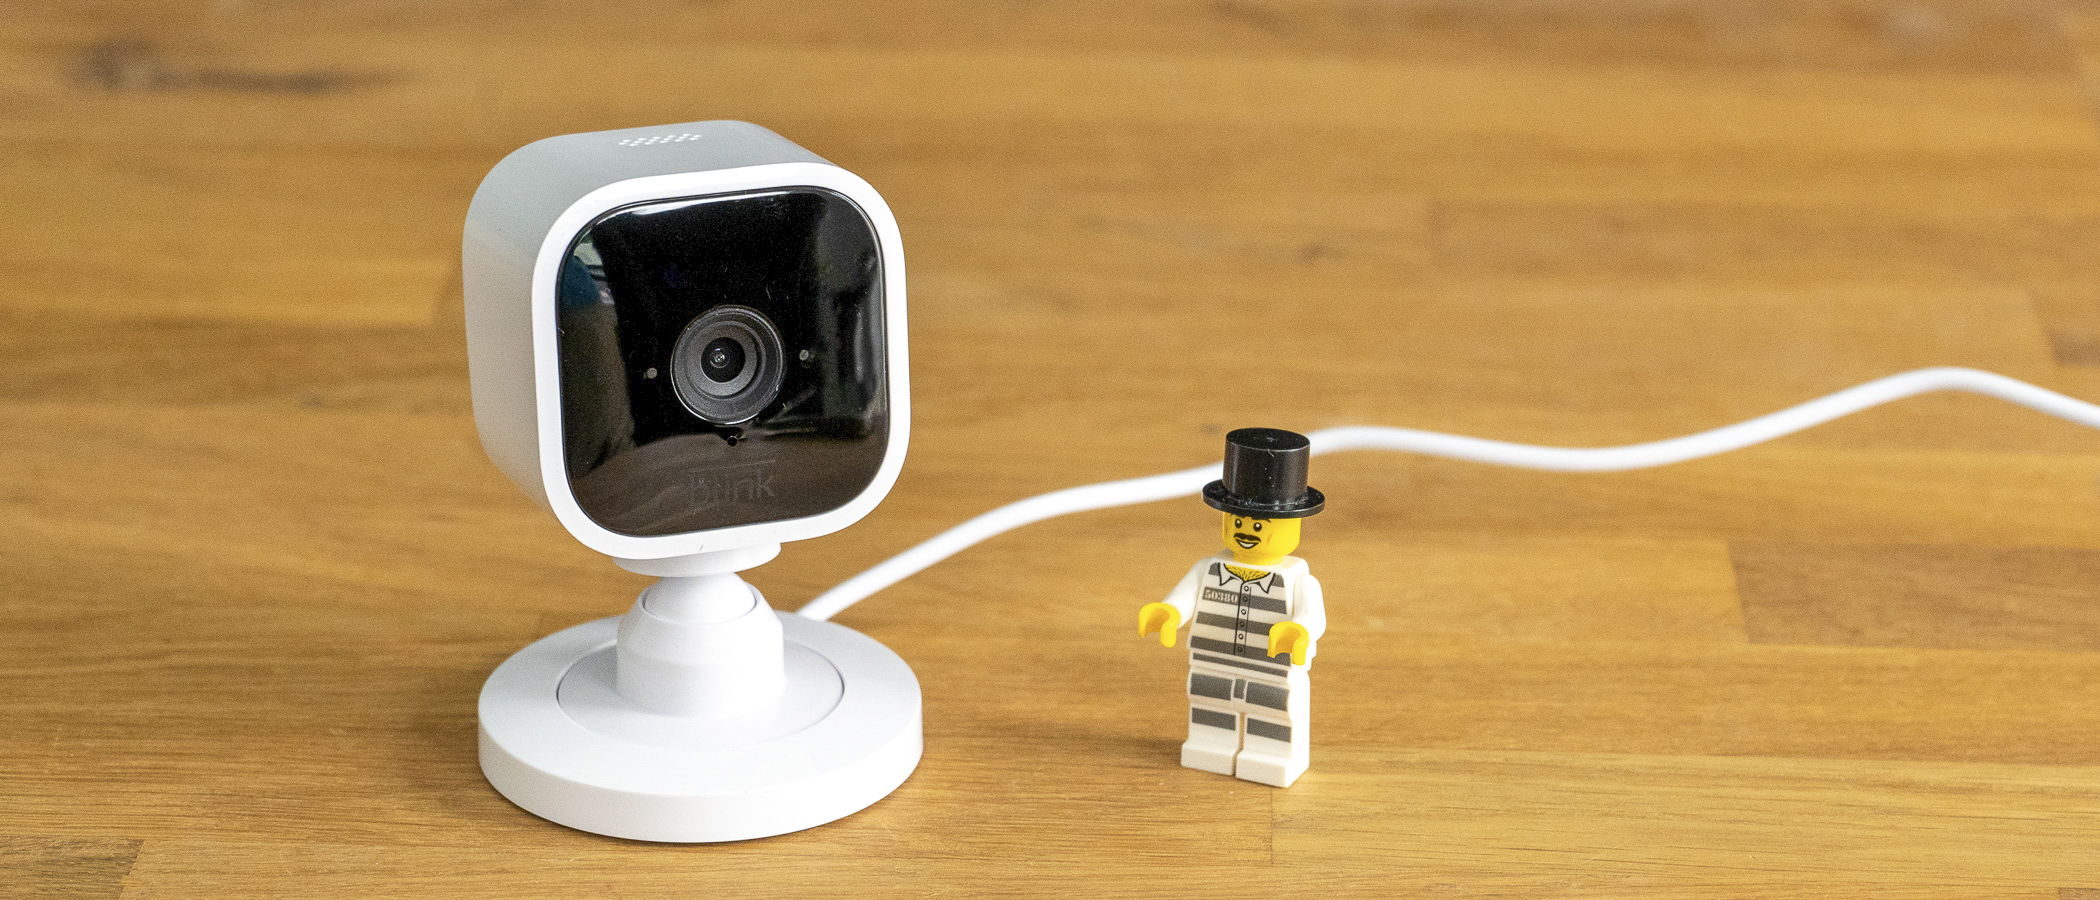 The new $35 Blink Mini indoor camera is Blink's least expensive cam yet